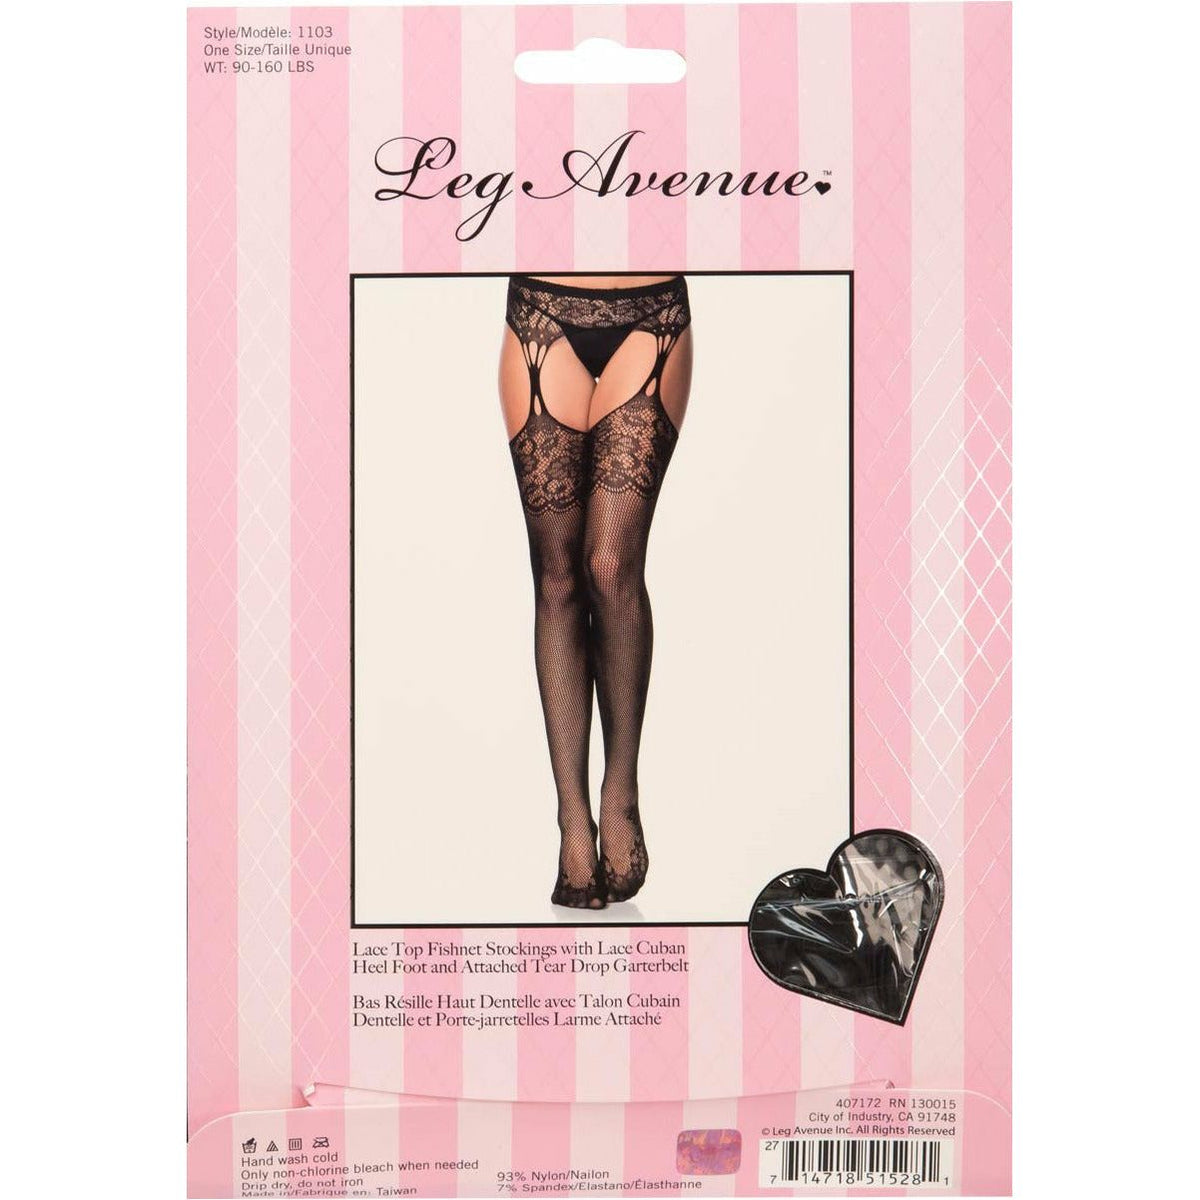 Leg Avenue Lace Top Fishnet Stockings with Lace - Black - One Size